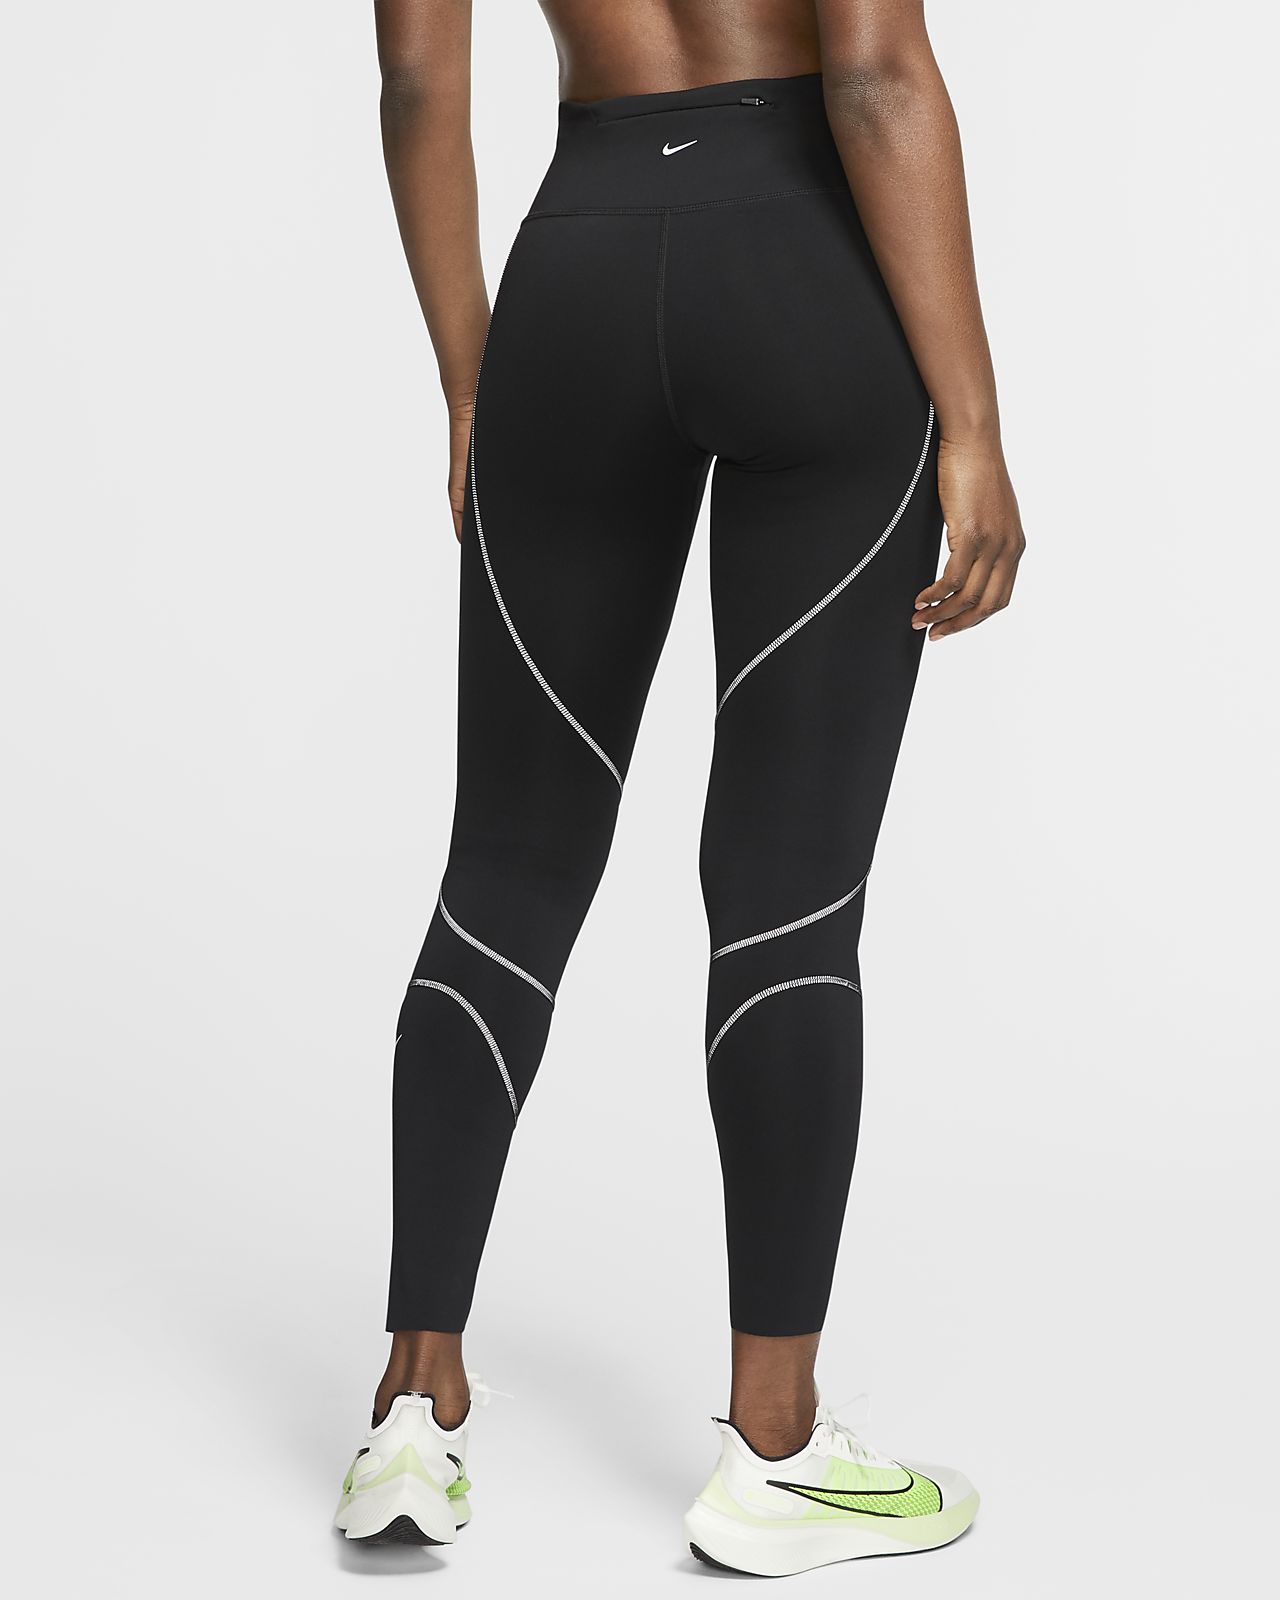 the nike epic lux tight fit